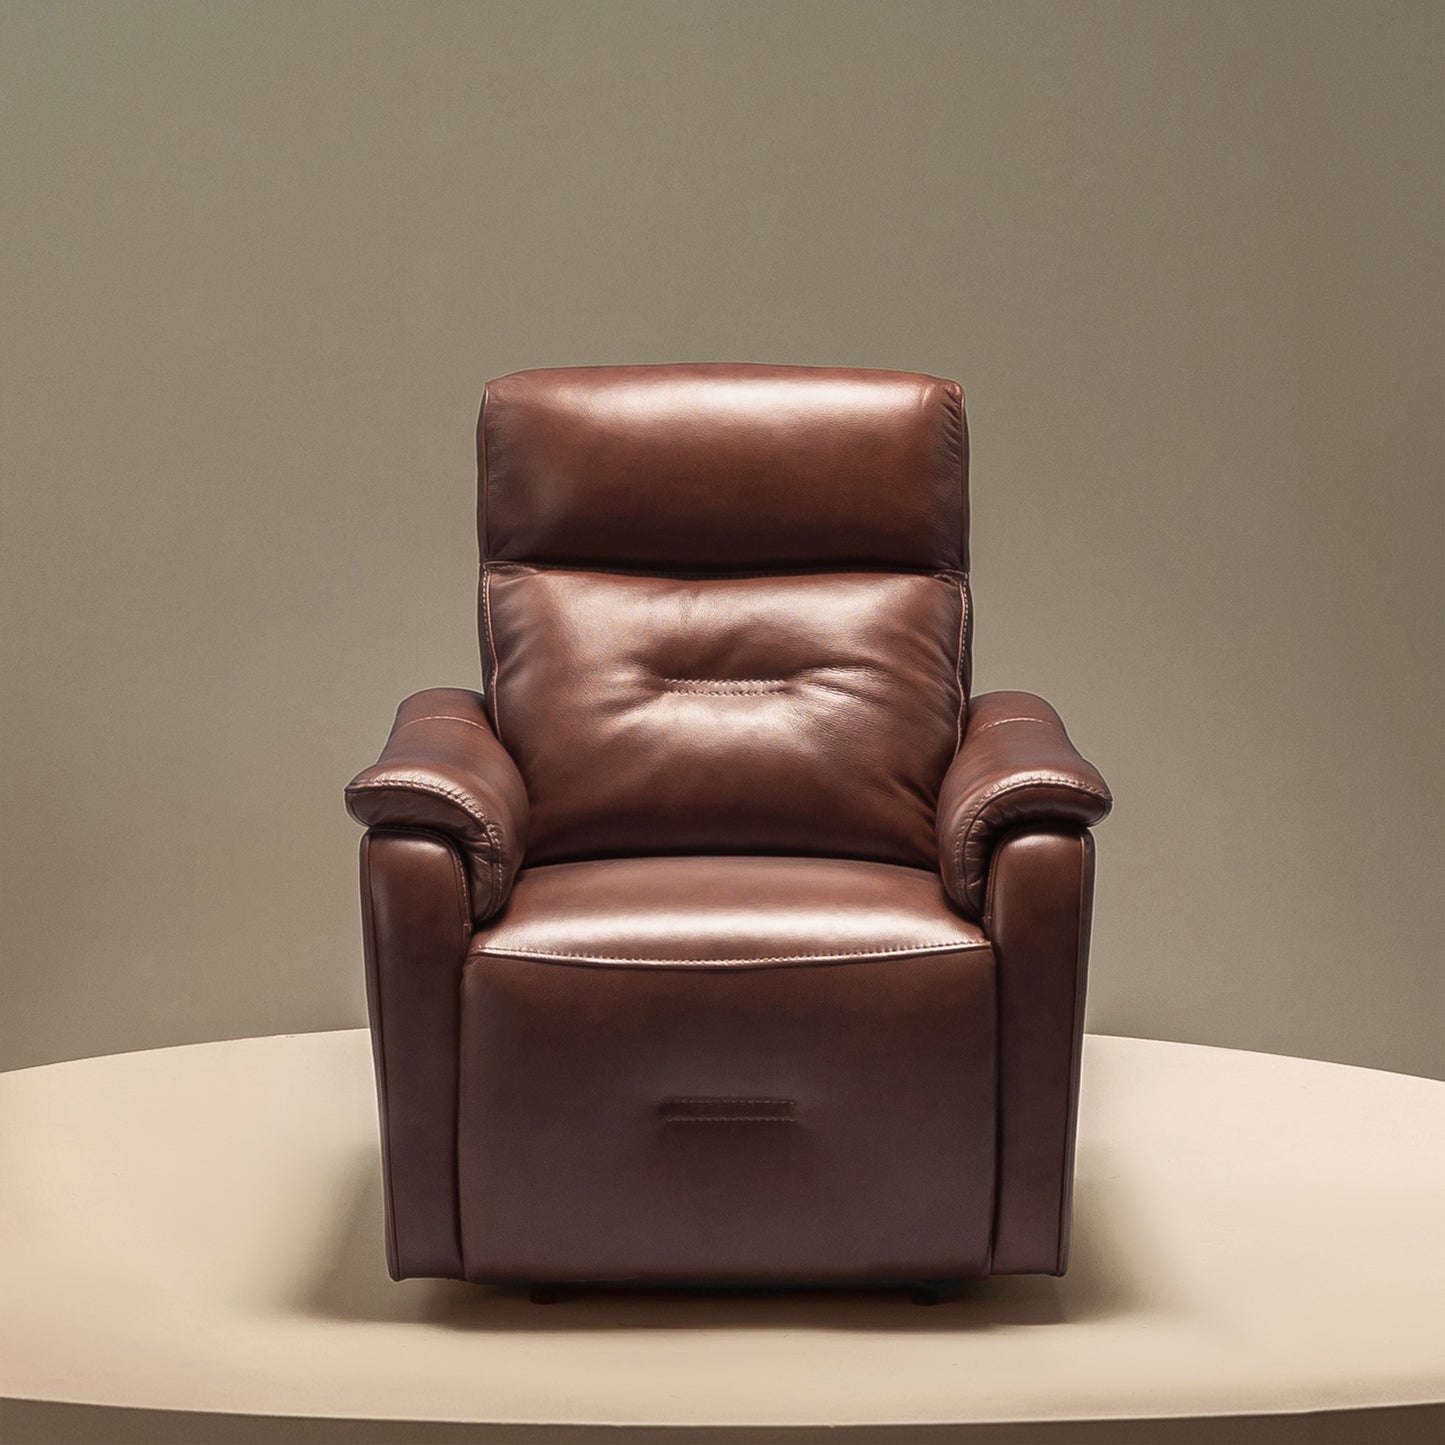 EGO Adjustable Leather Recliner Chair